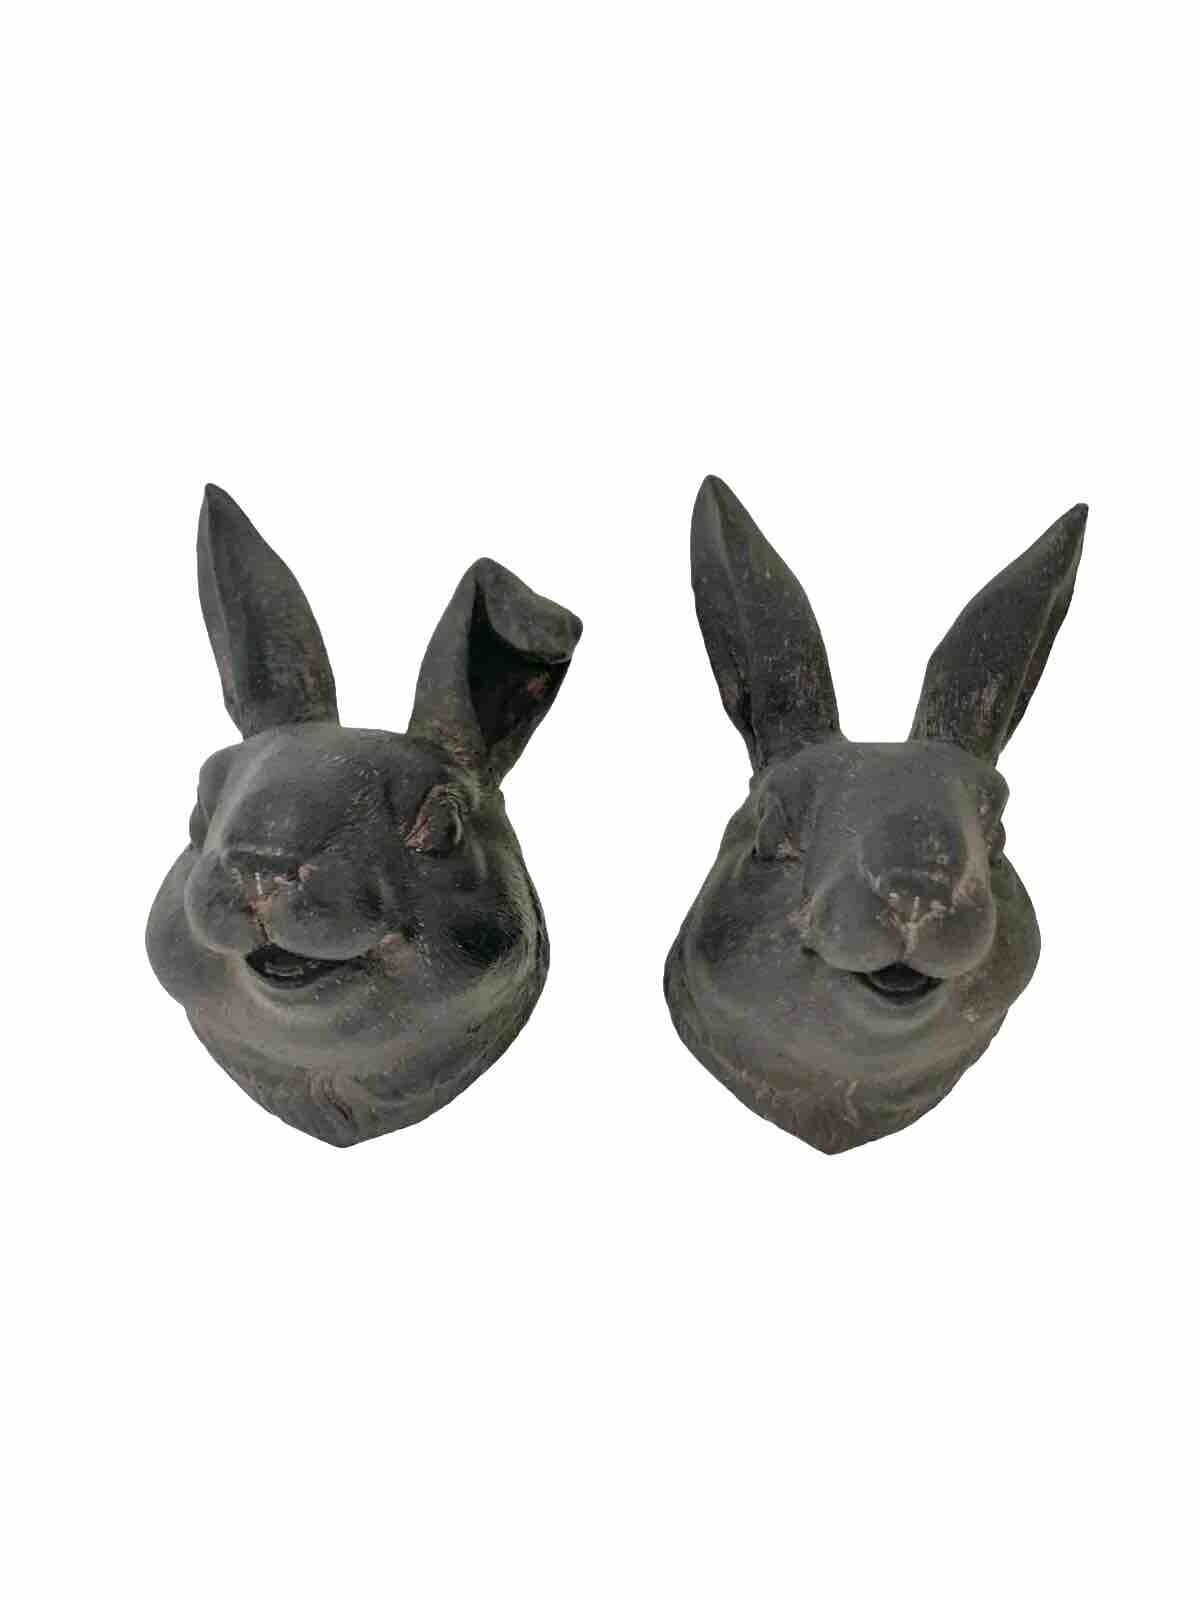 Bunny Head Wall Mount Pair Rabbit Figurine Frontgate Brand Spring Easter Decor